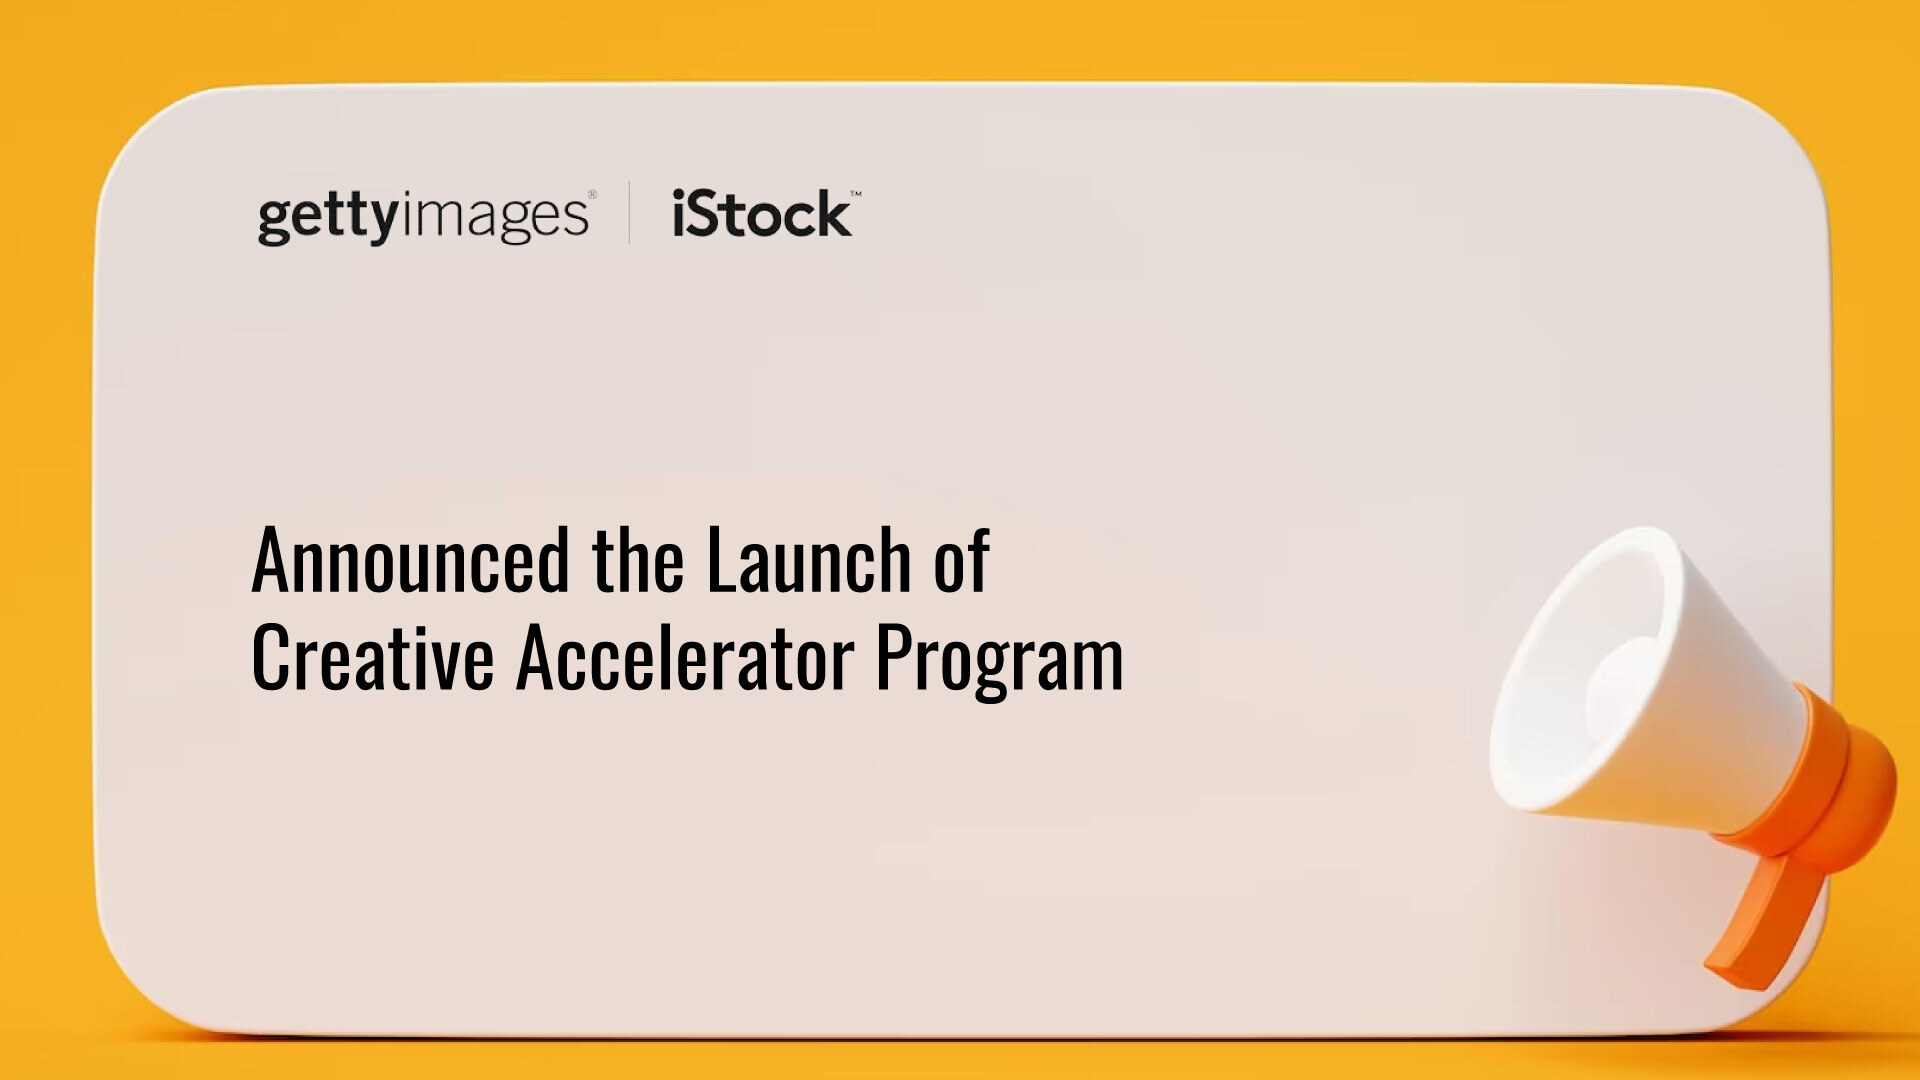 Getty Images and iStock Empower Emerging Creatives Through New Accelerator Program